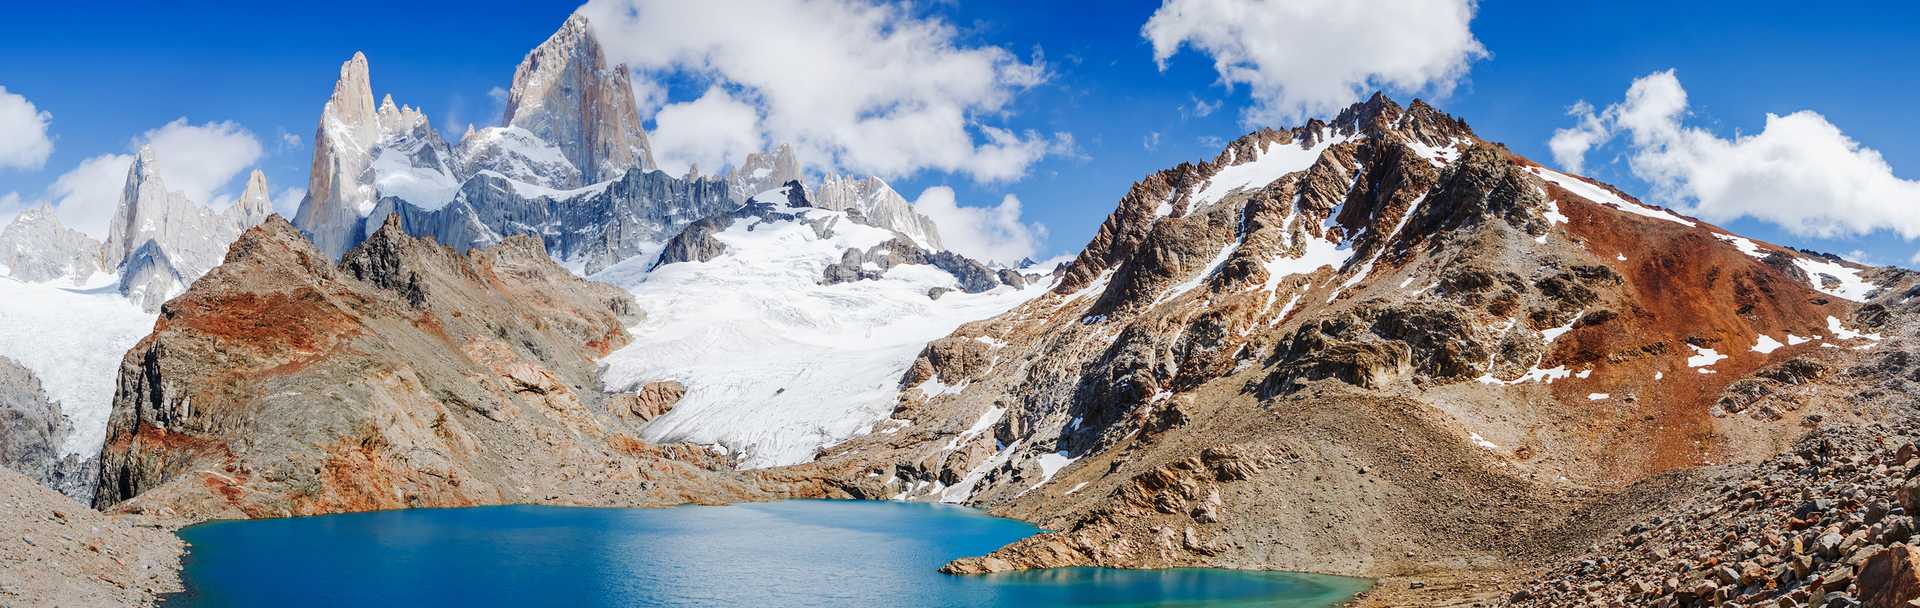 Argentina &amp; Chile Tour - Mountain Views in Patagonia